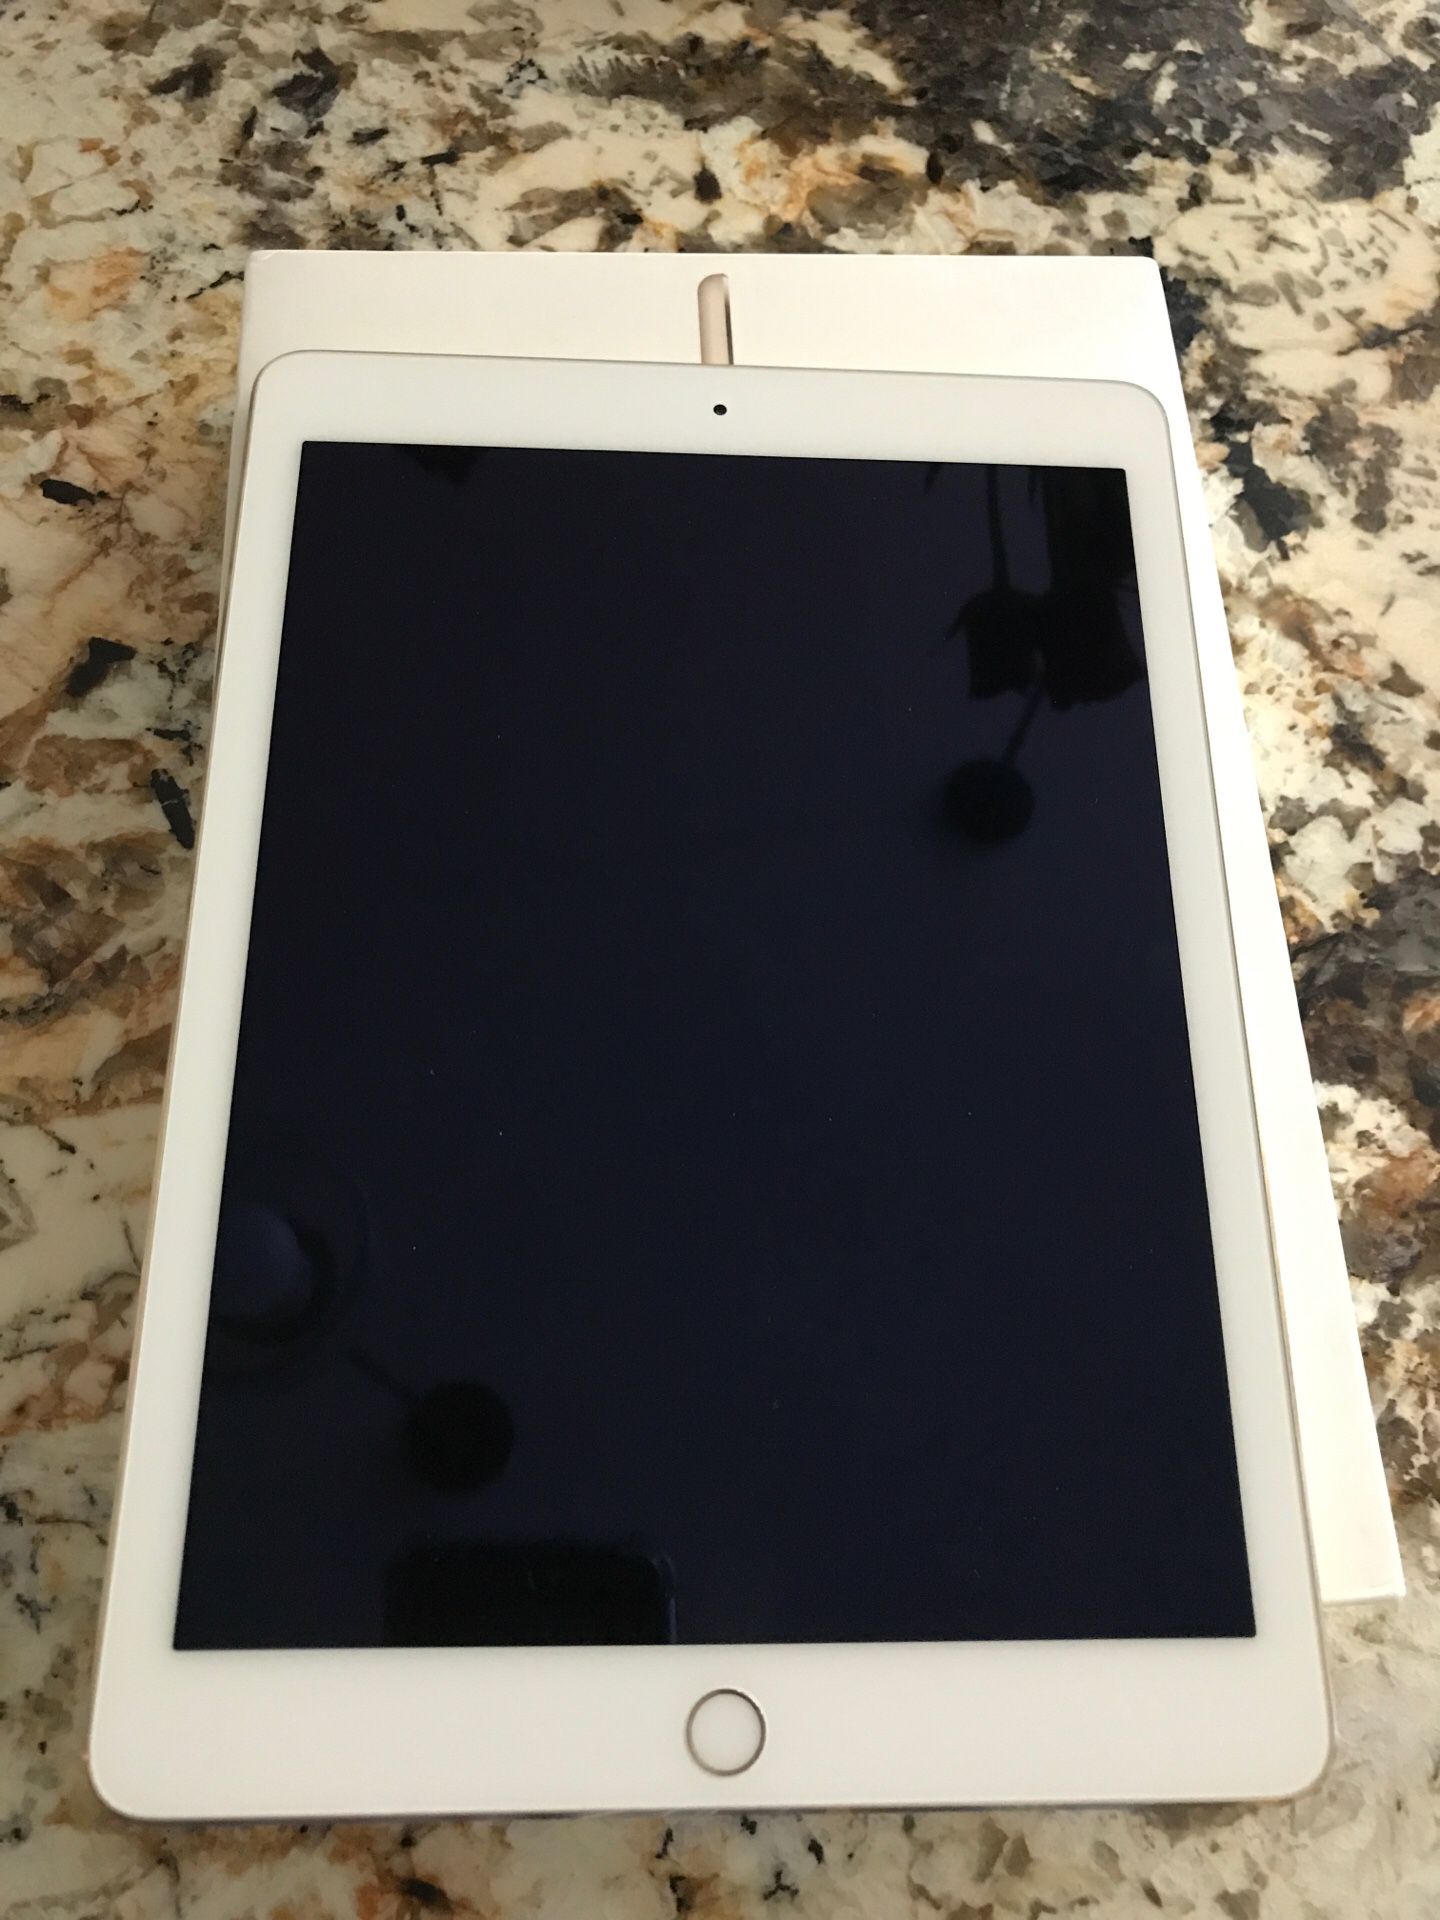 iPad Air 2, 16GB, Gold, used for 3 days